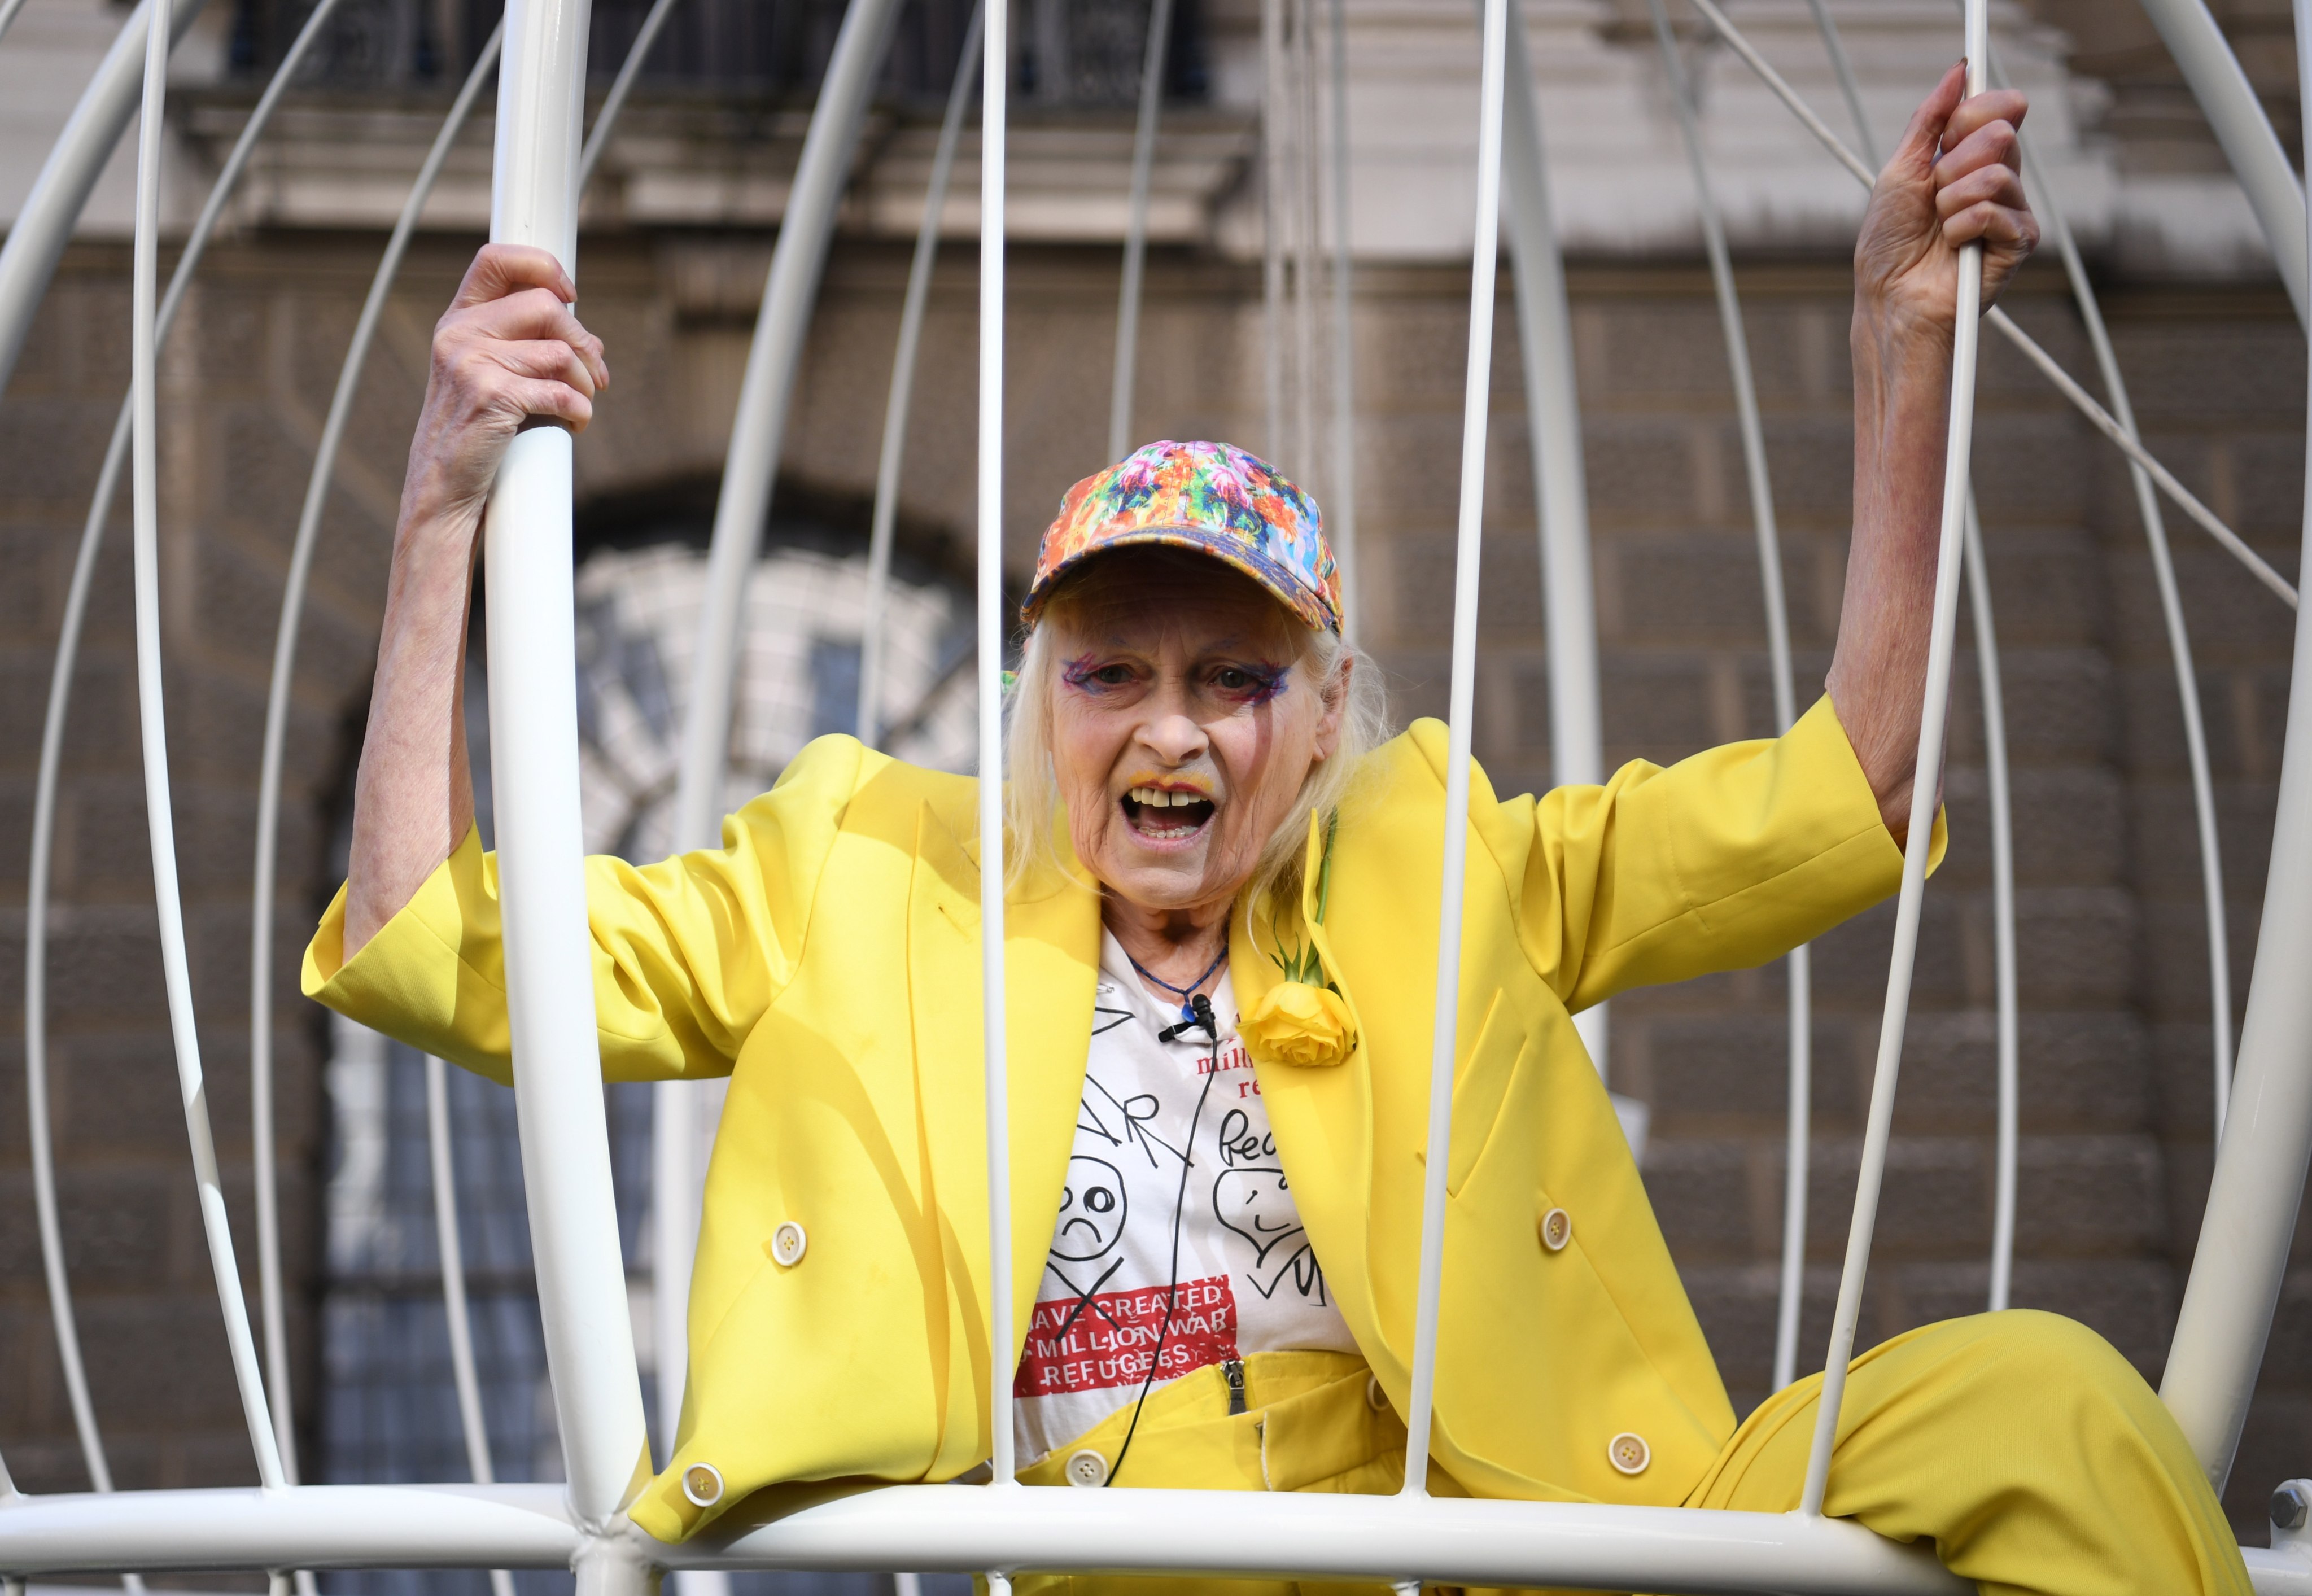 Vivienne Westwood’s activism extended to supporting Wikileaks founder Julian Assange, posing in a giant birdcage in 2020 to try to halt his extradition to the US. File photo: EPA-EFE